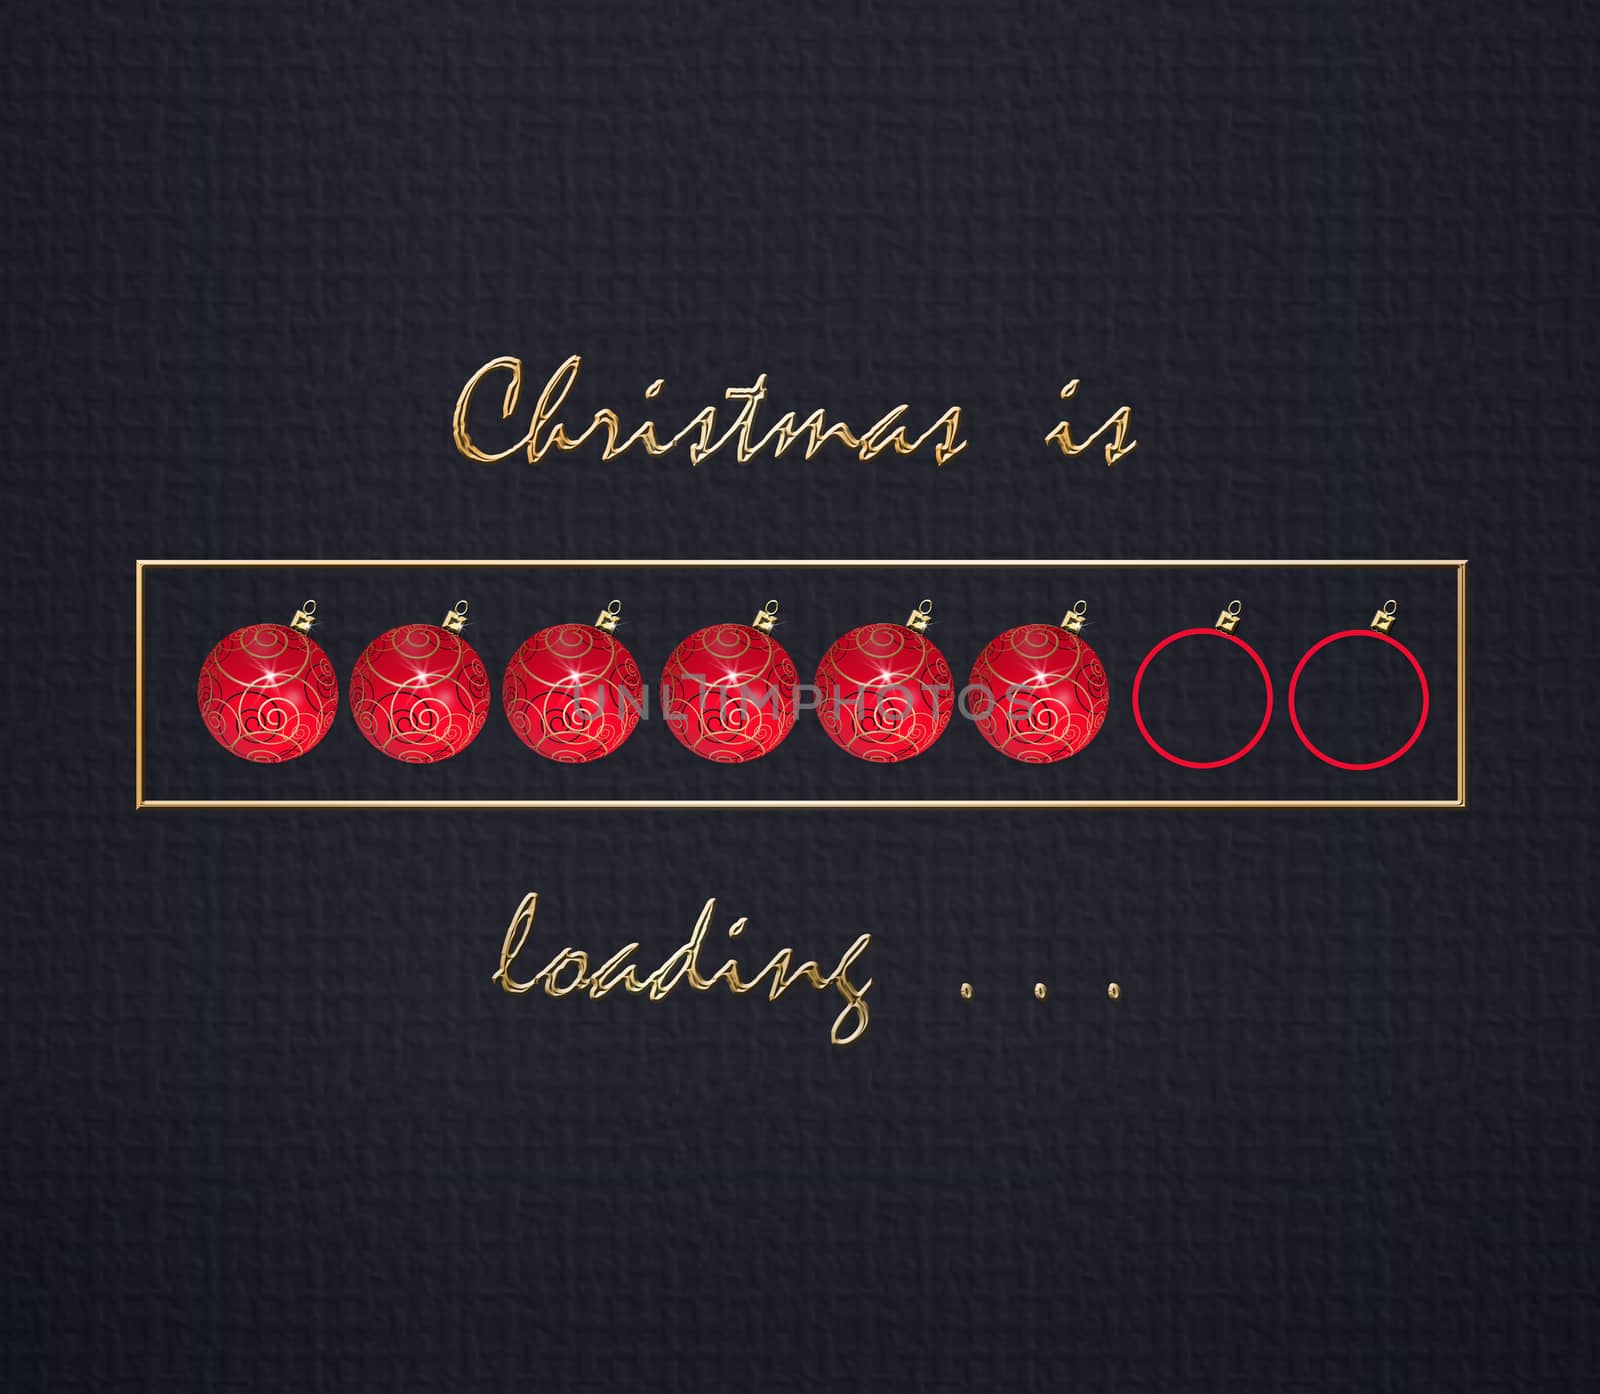 Loading Christmas or 2021 New Year design. Progress indicator made of red gold Christmas balls baubles on dark blue background. Text Christmas is loading. 3D render